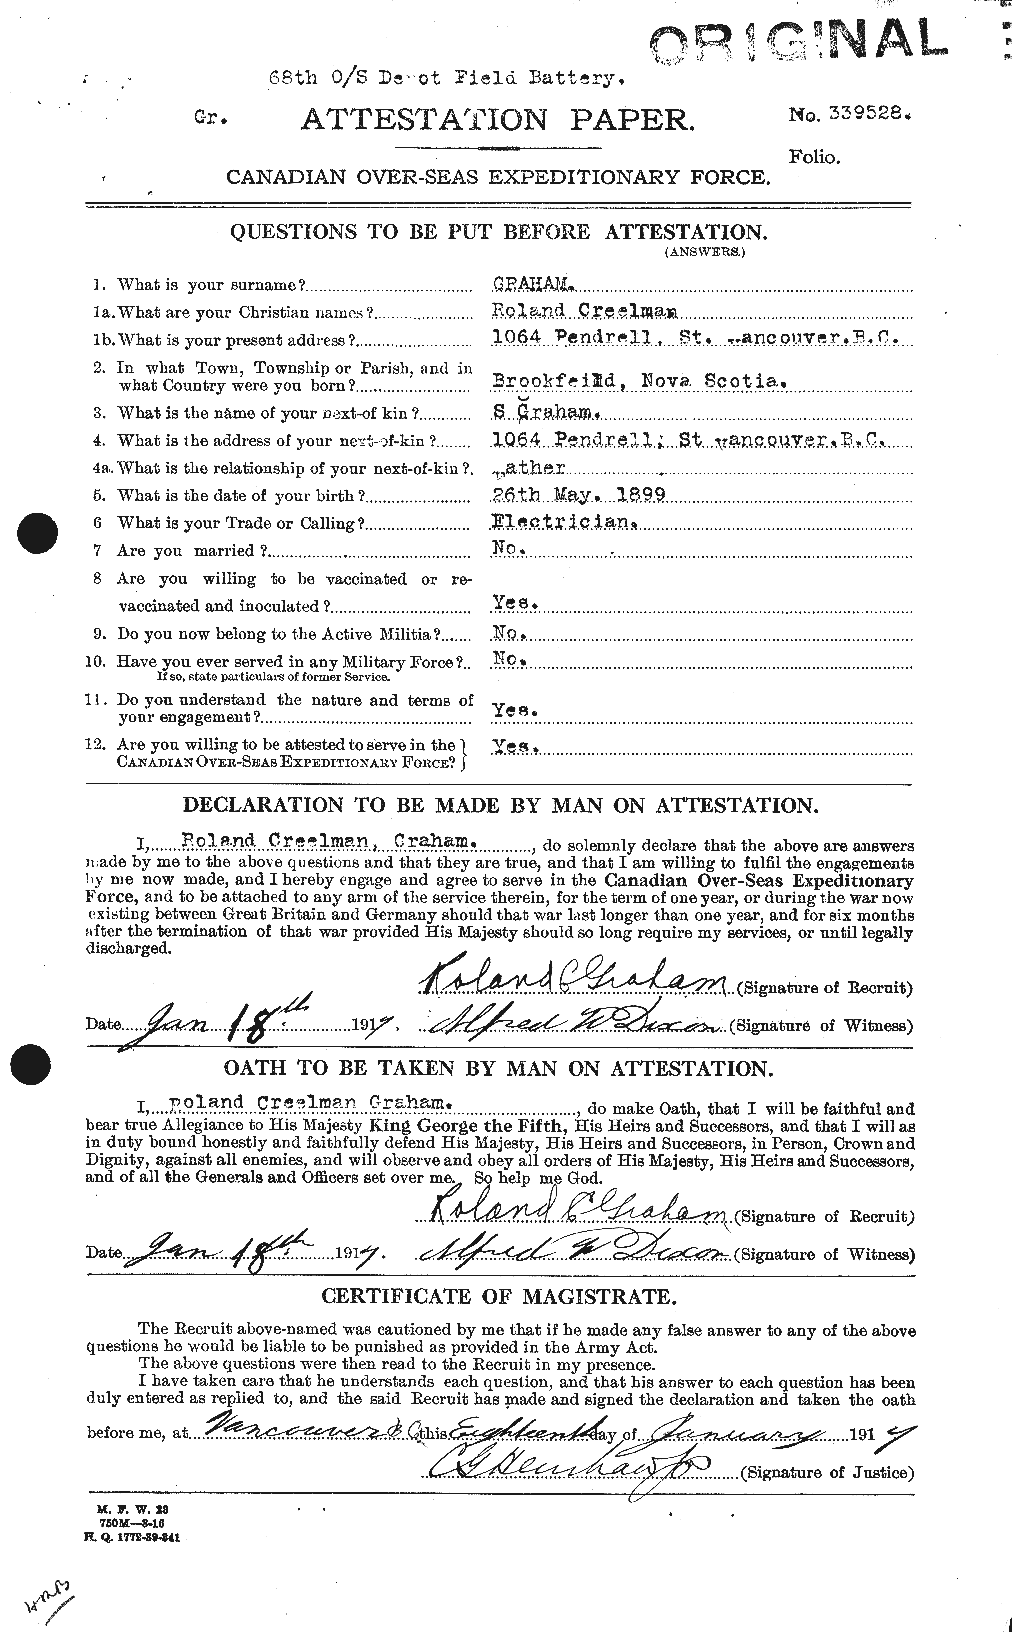 Personnel Records of the First World War - CEF 359429a